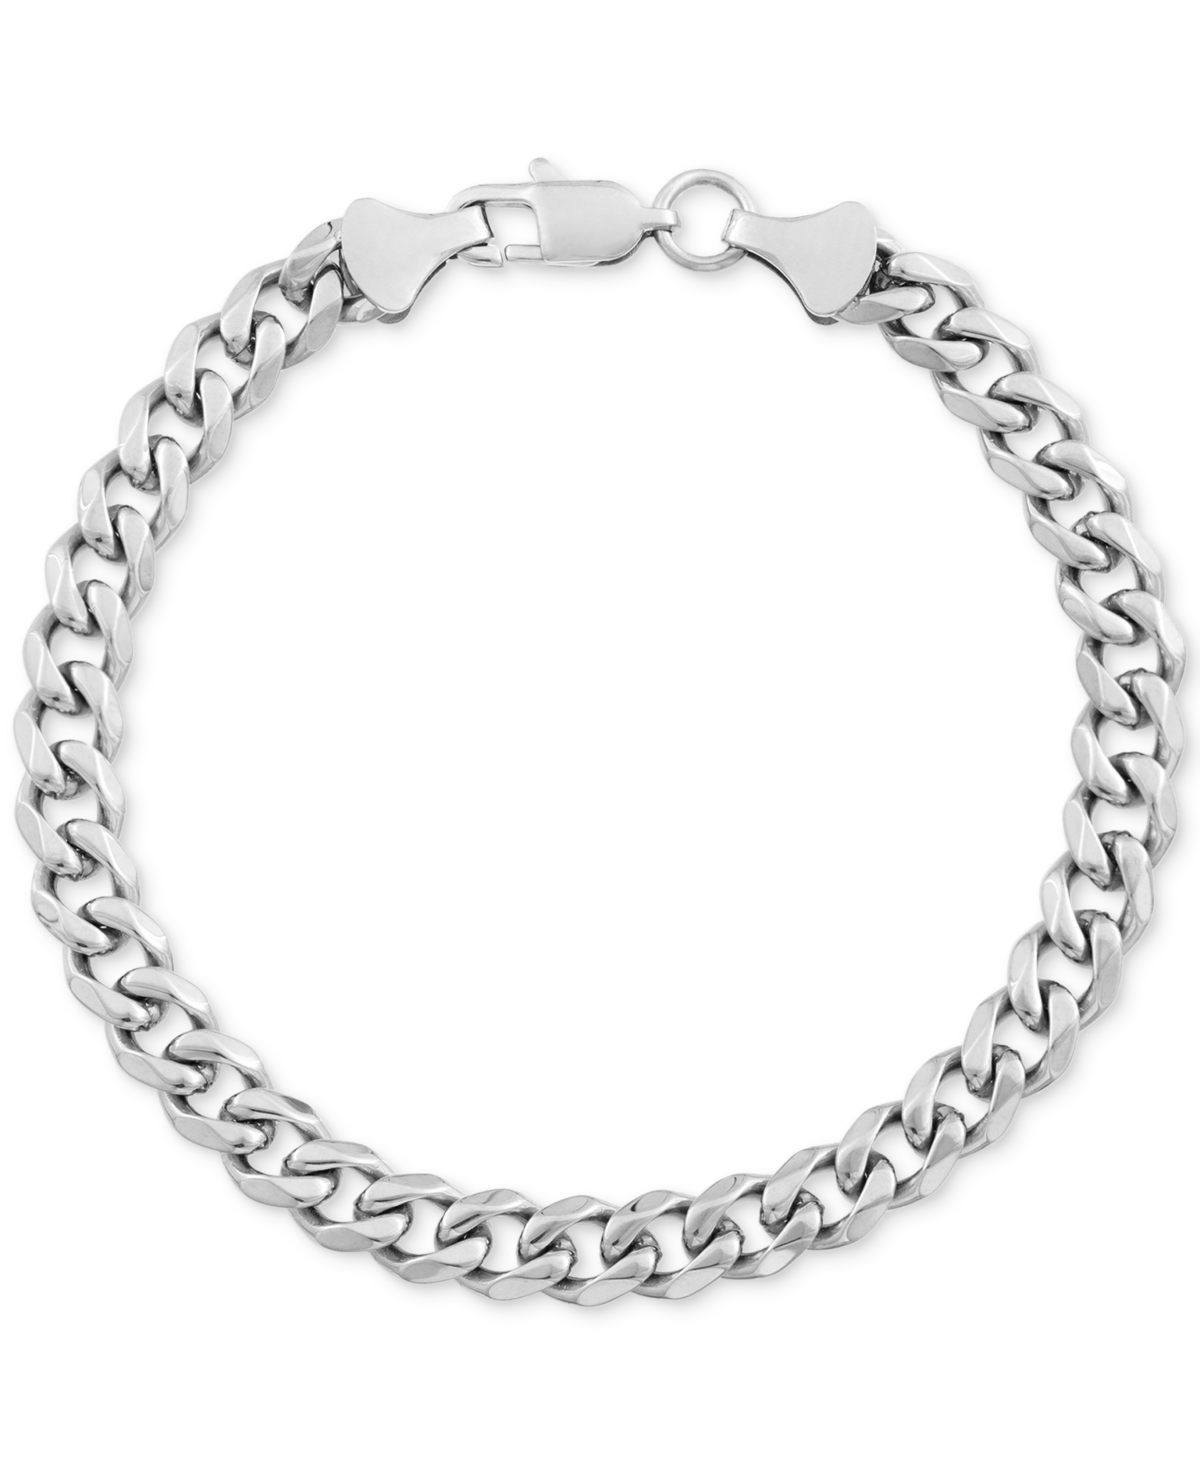 Smith Men's Curb Link Chain Bracelet in Stainless Steel - Stainless Steel